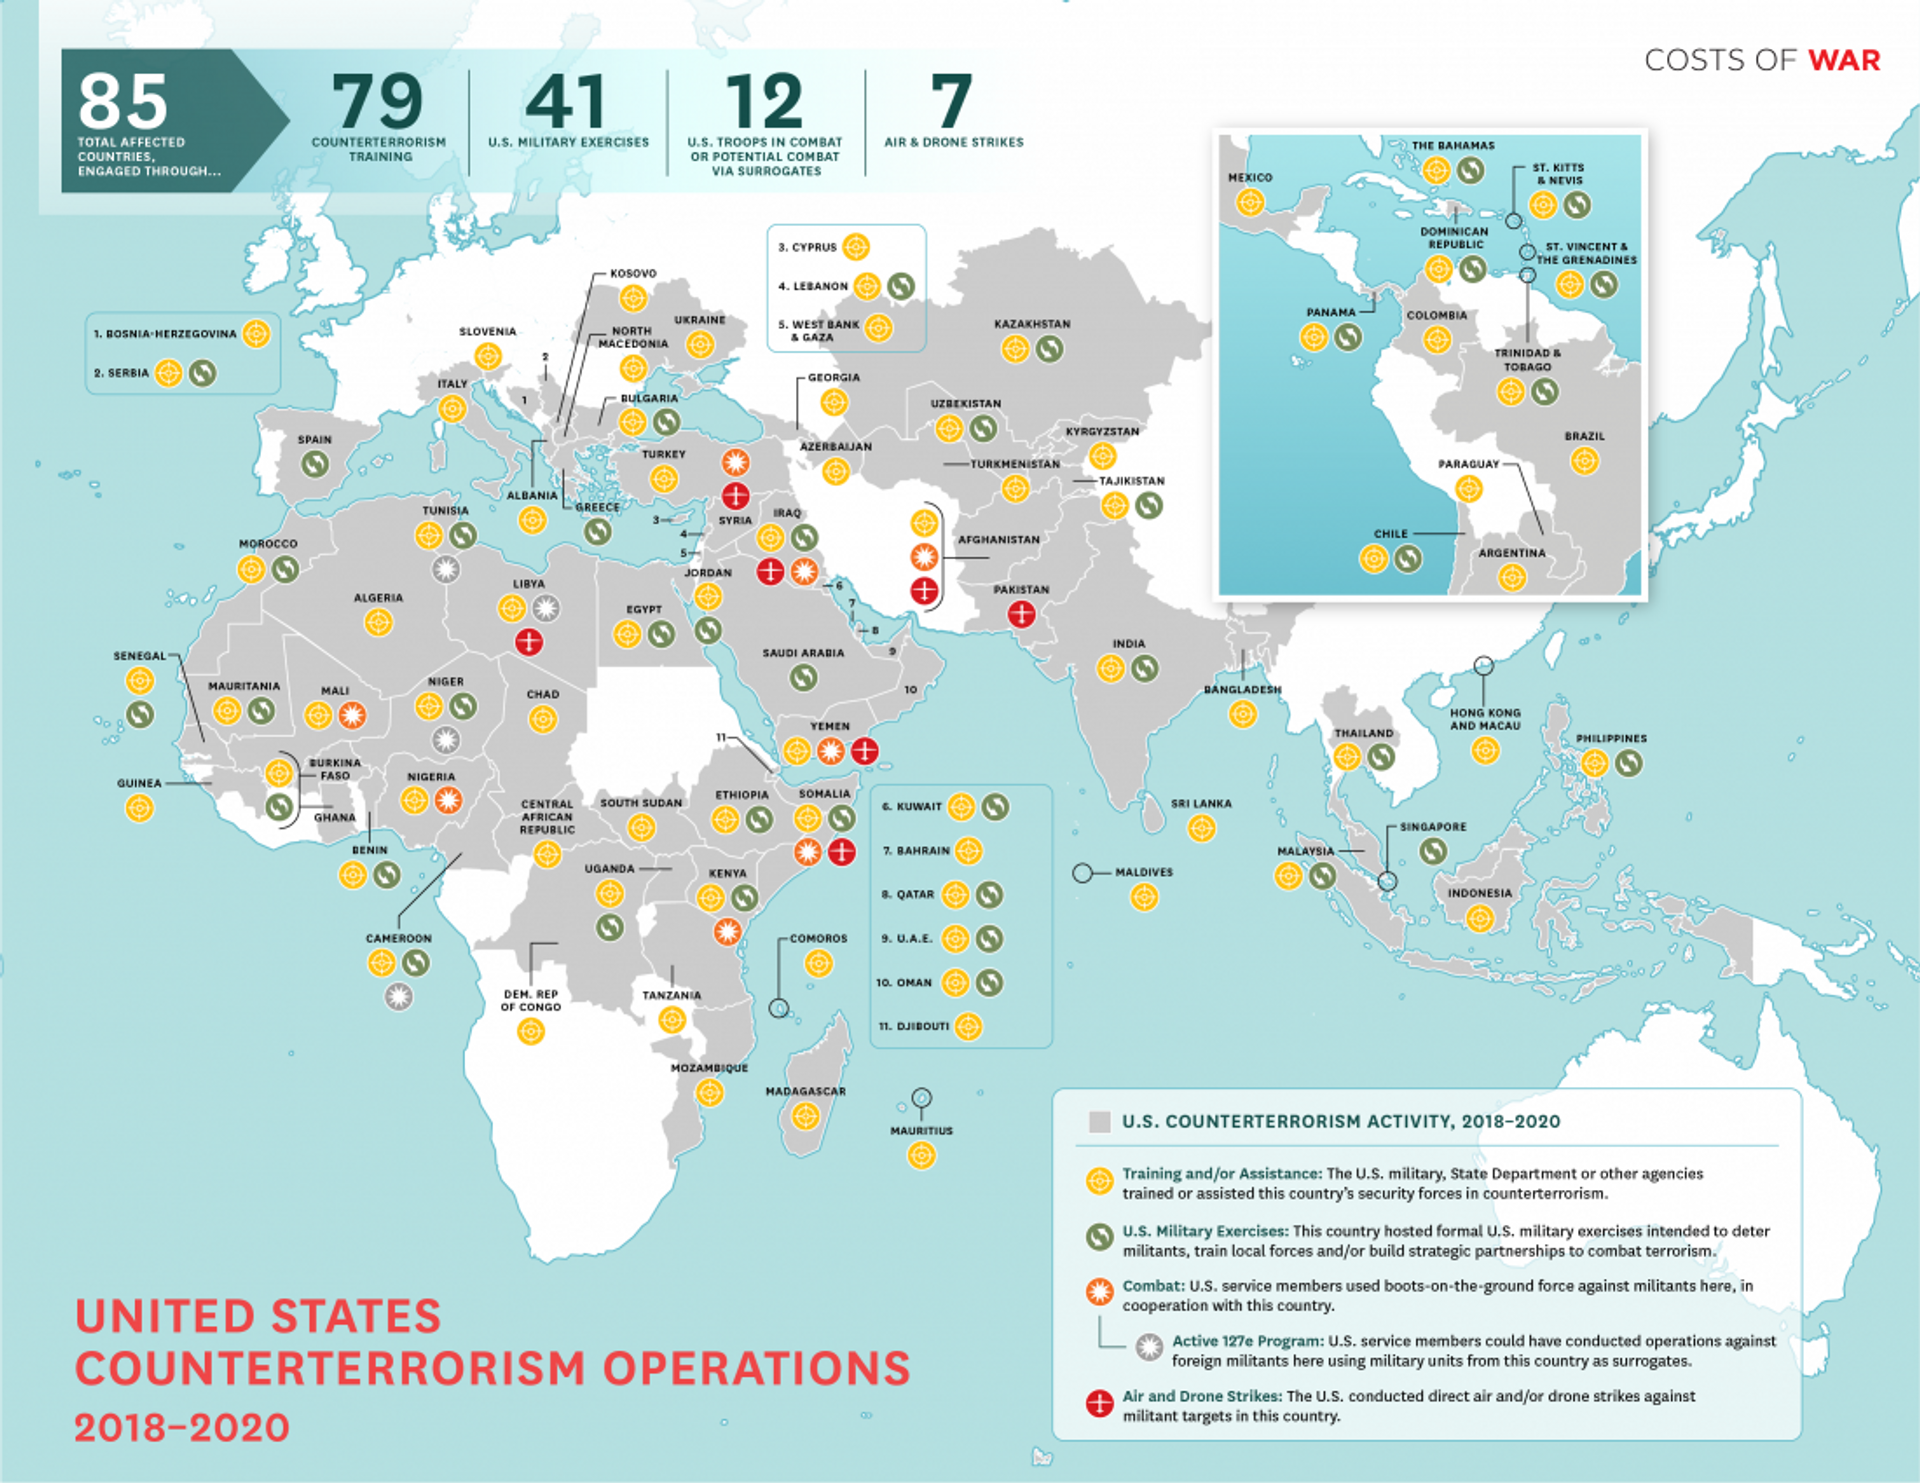 Map of 'US Counterterrorism Operations' 2018-2020 compiled by the Costs of War Project. - Sputnik International, 1920, 13.01.2023